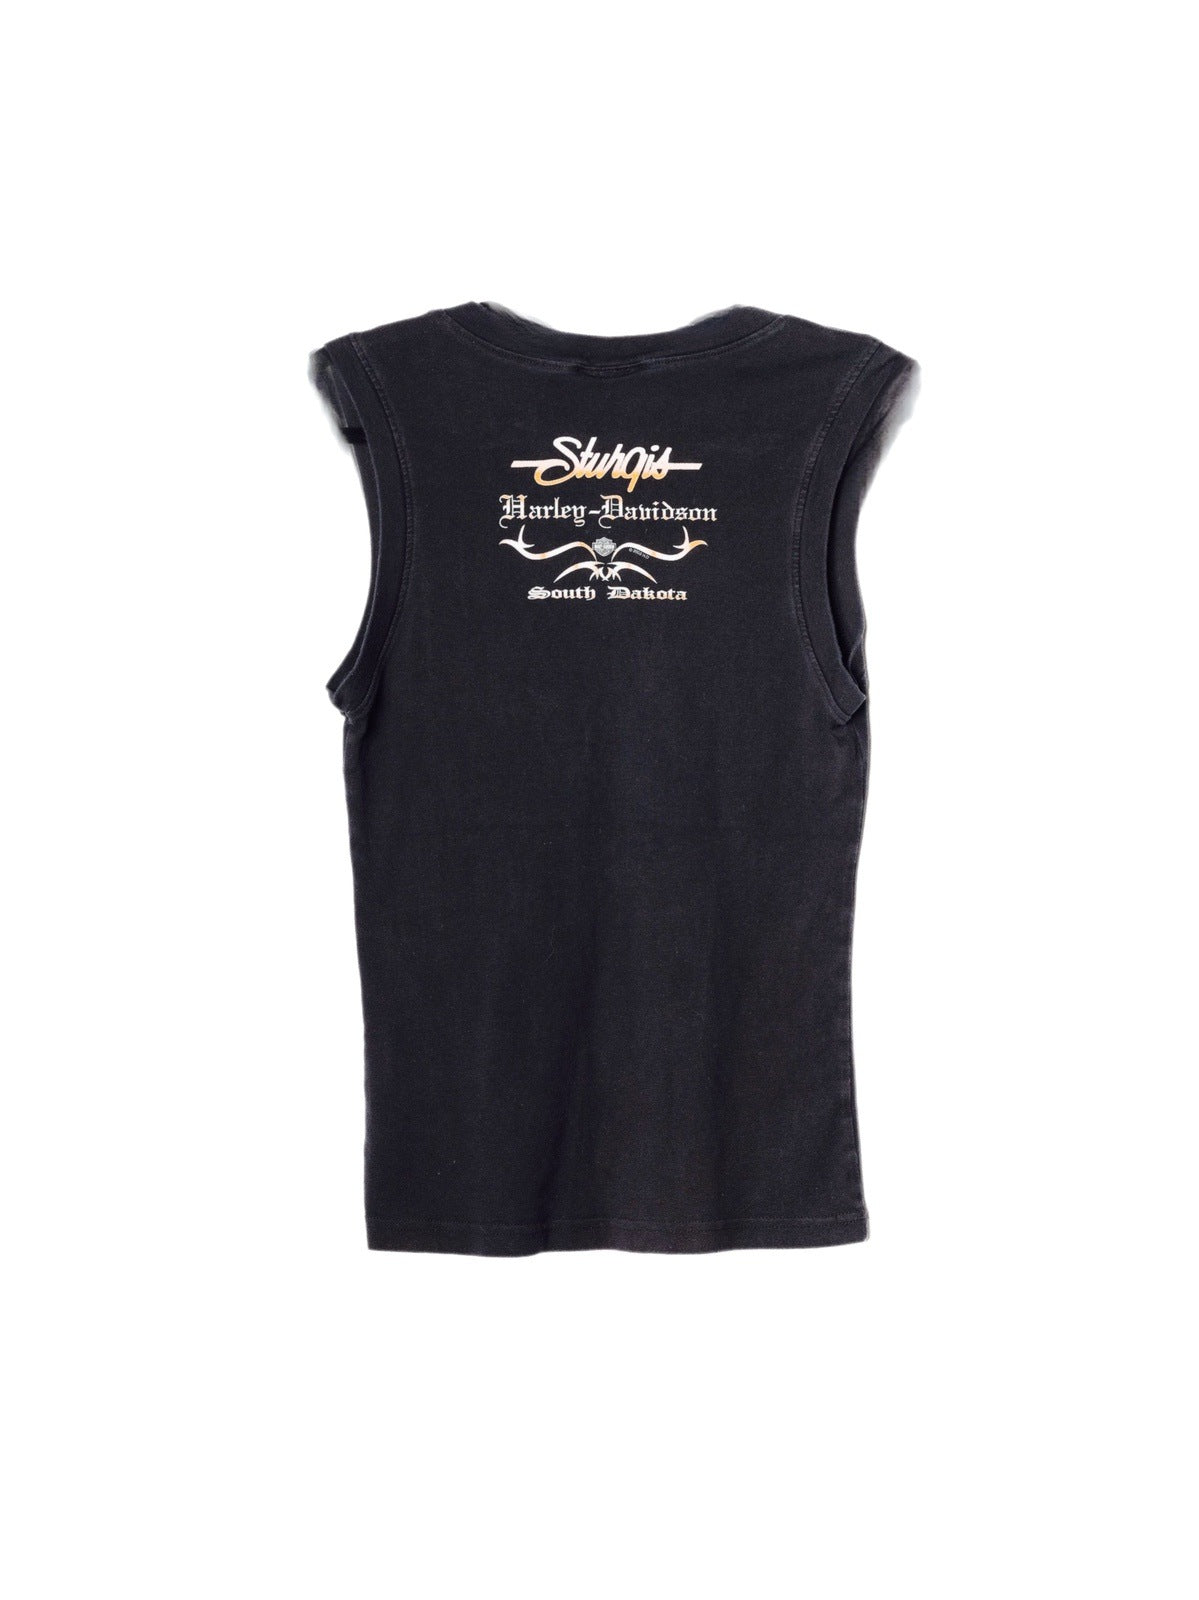 Embrace vintage allure with Vintage Harley Davidson 2004 Hills Rally Tank Top. Black tank tops with rhinestoned butterfly print